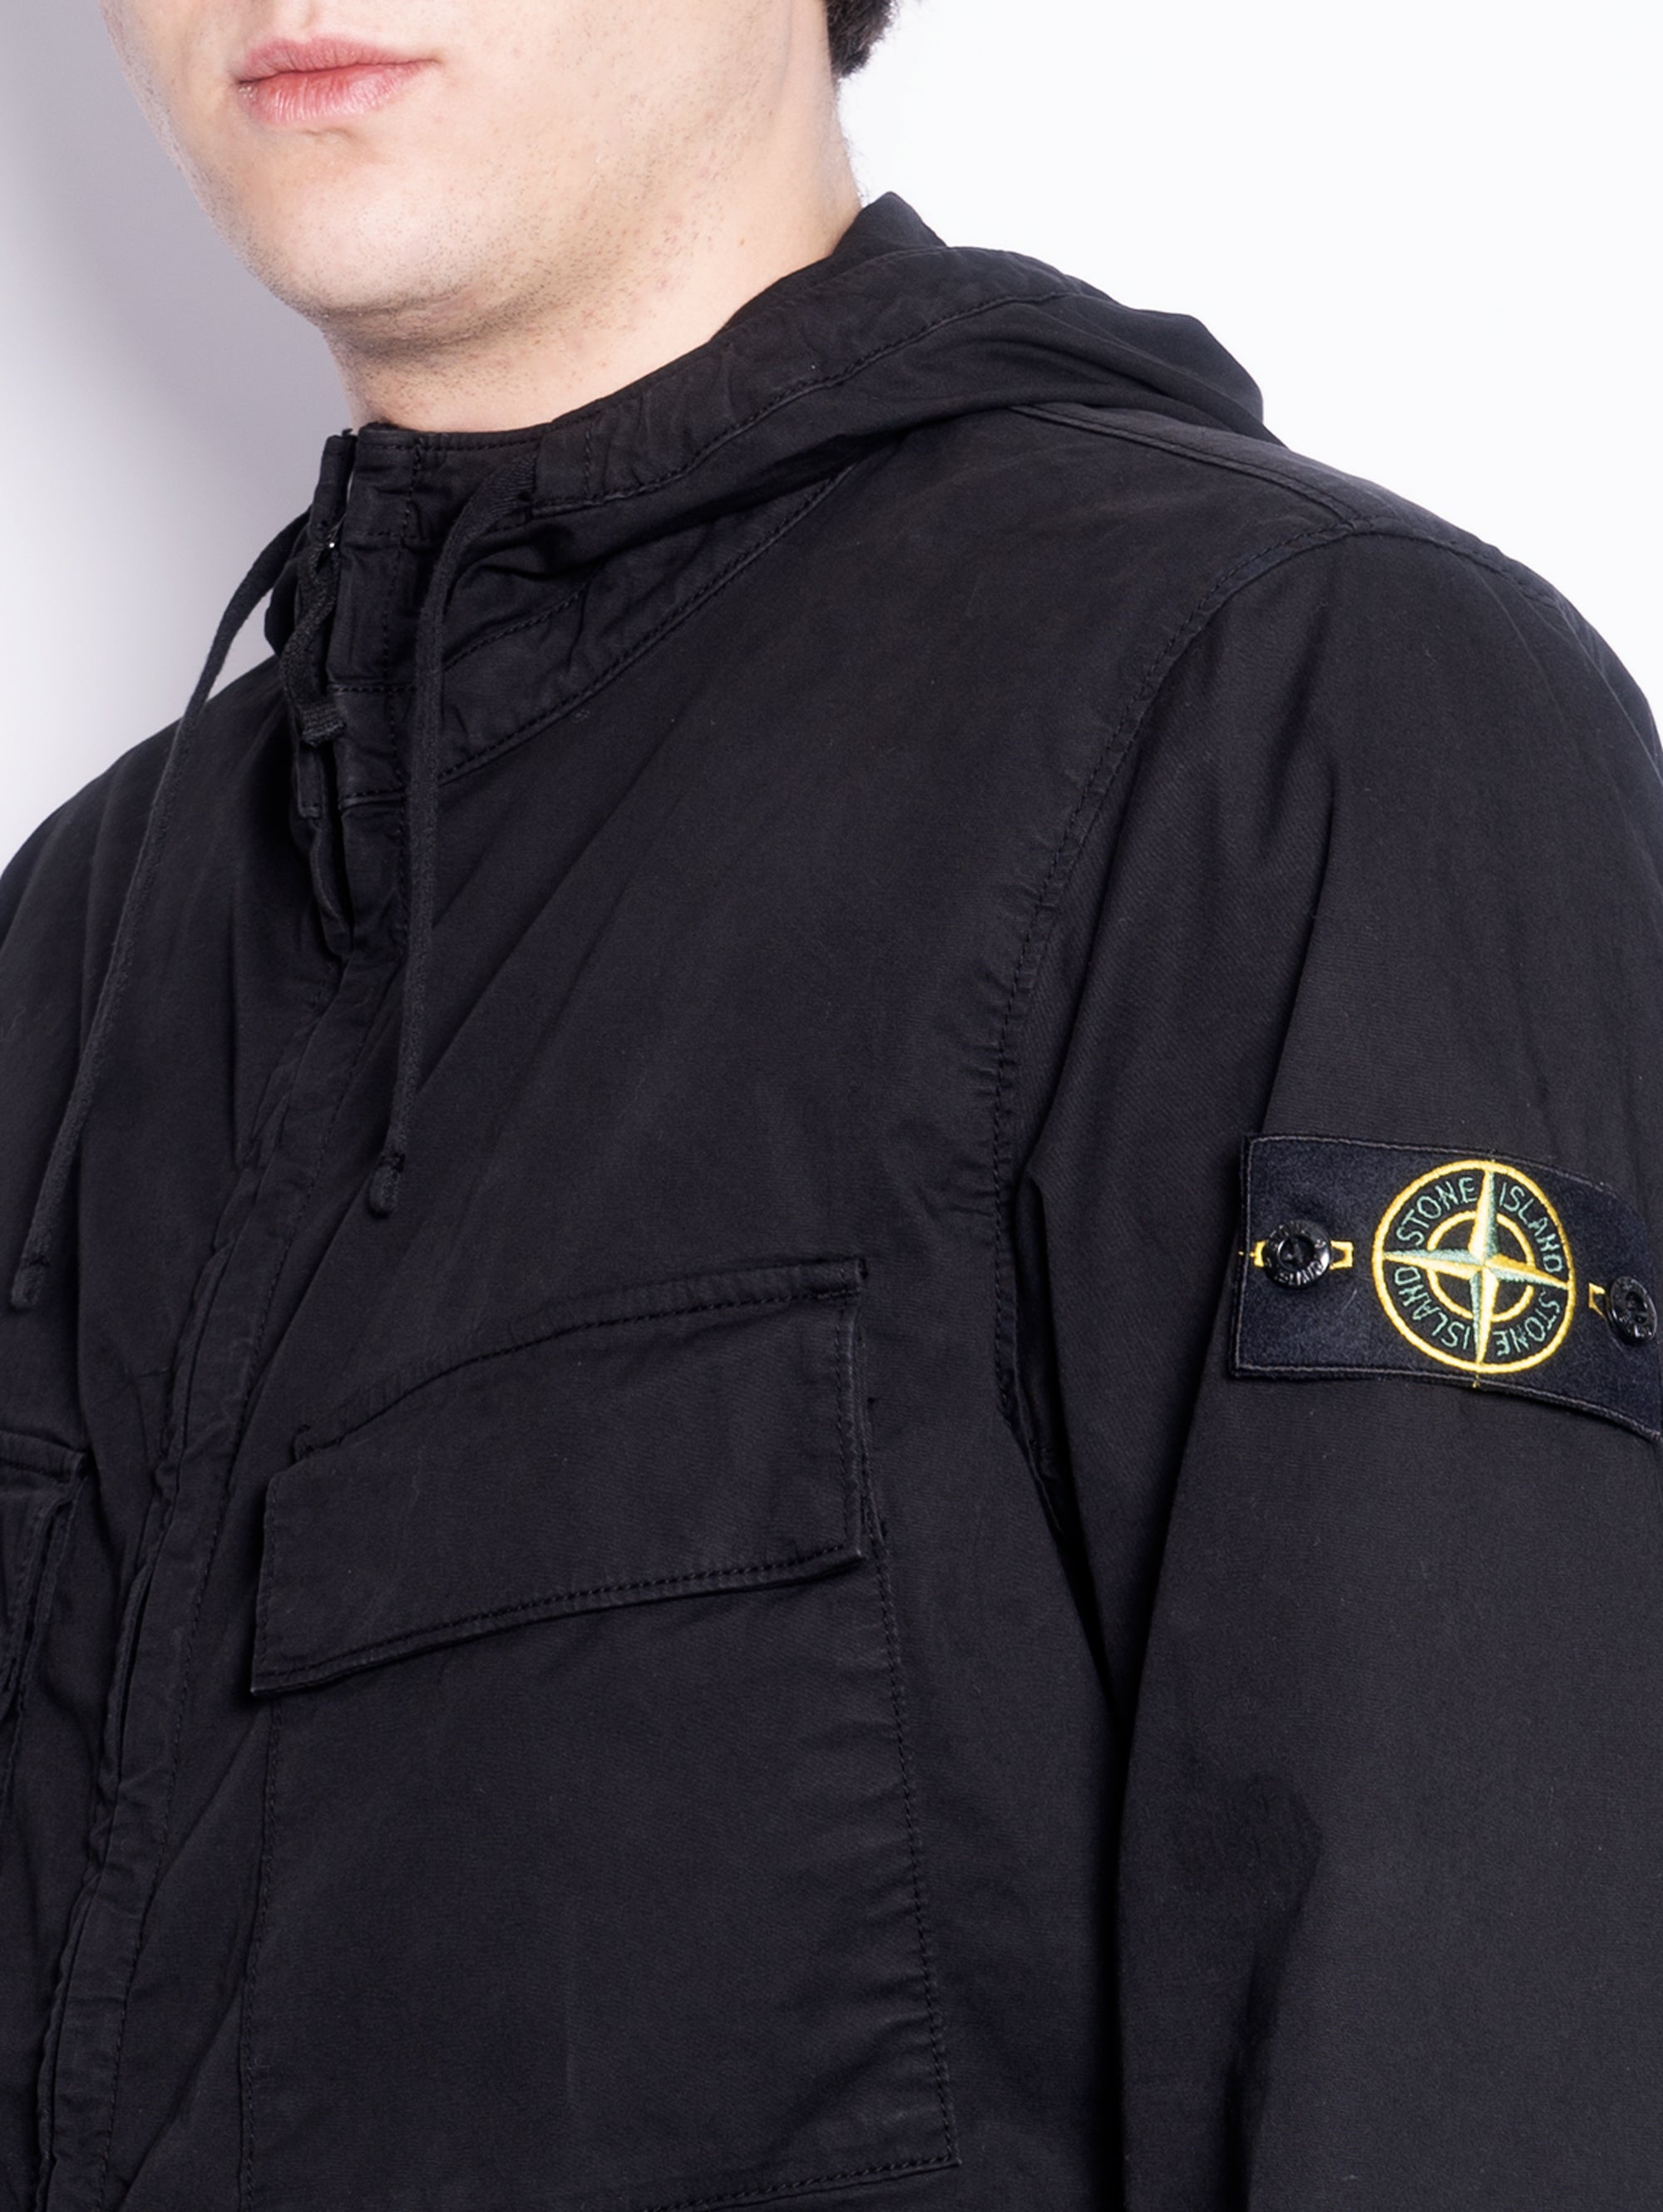 Jacket in Black Garment Dyed Supima Cotton Twill